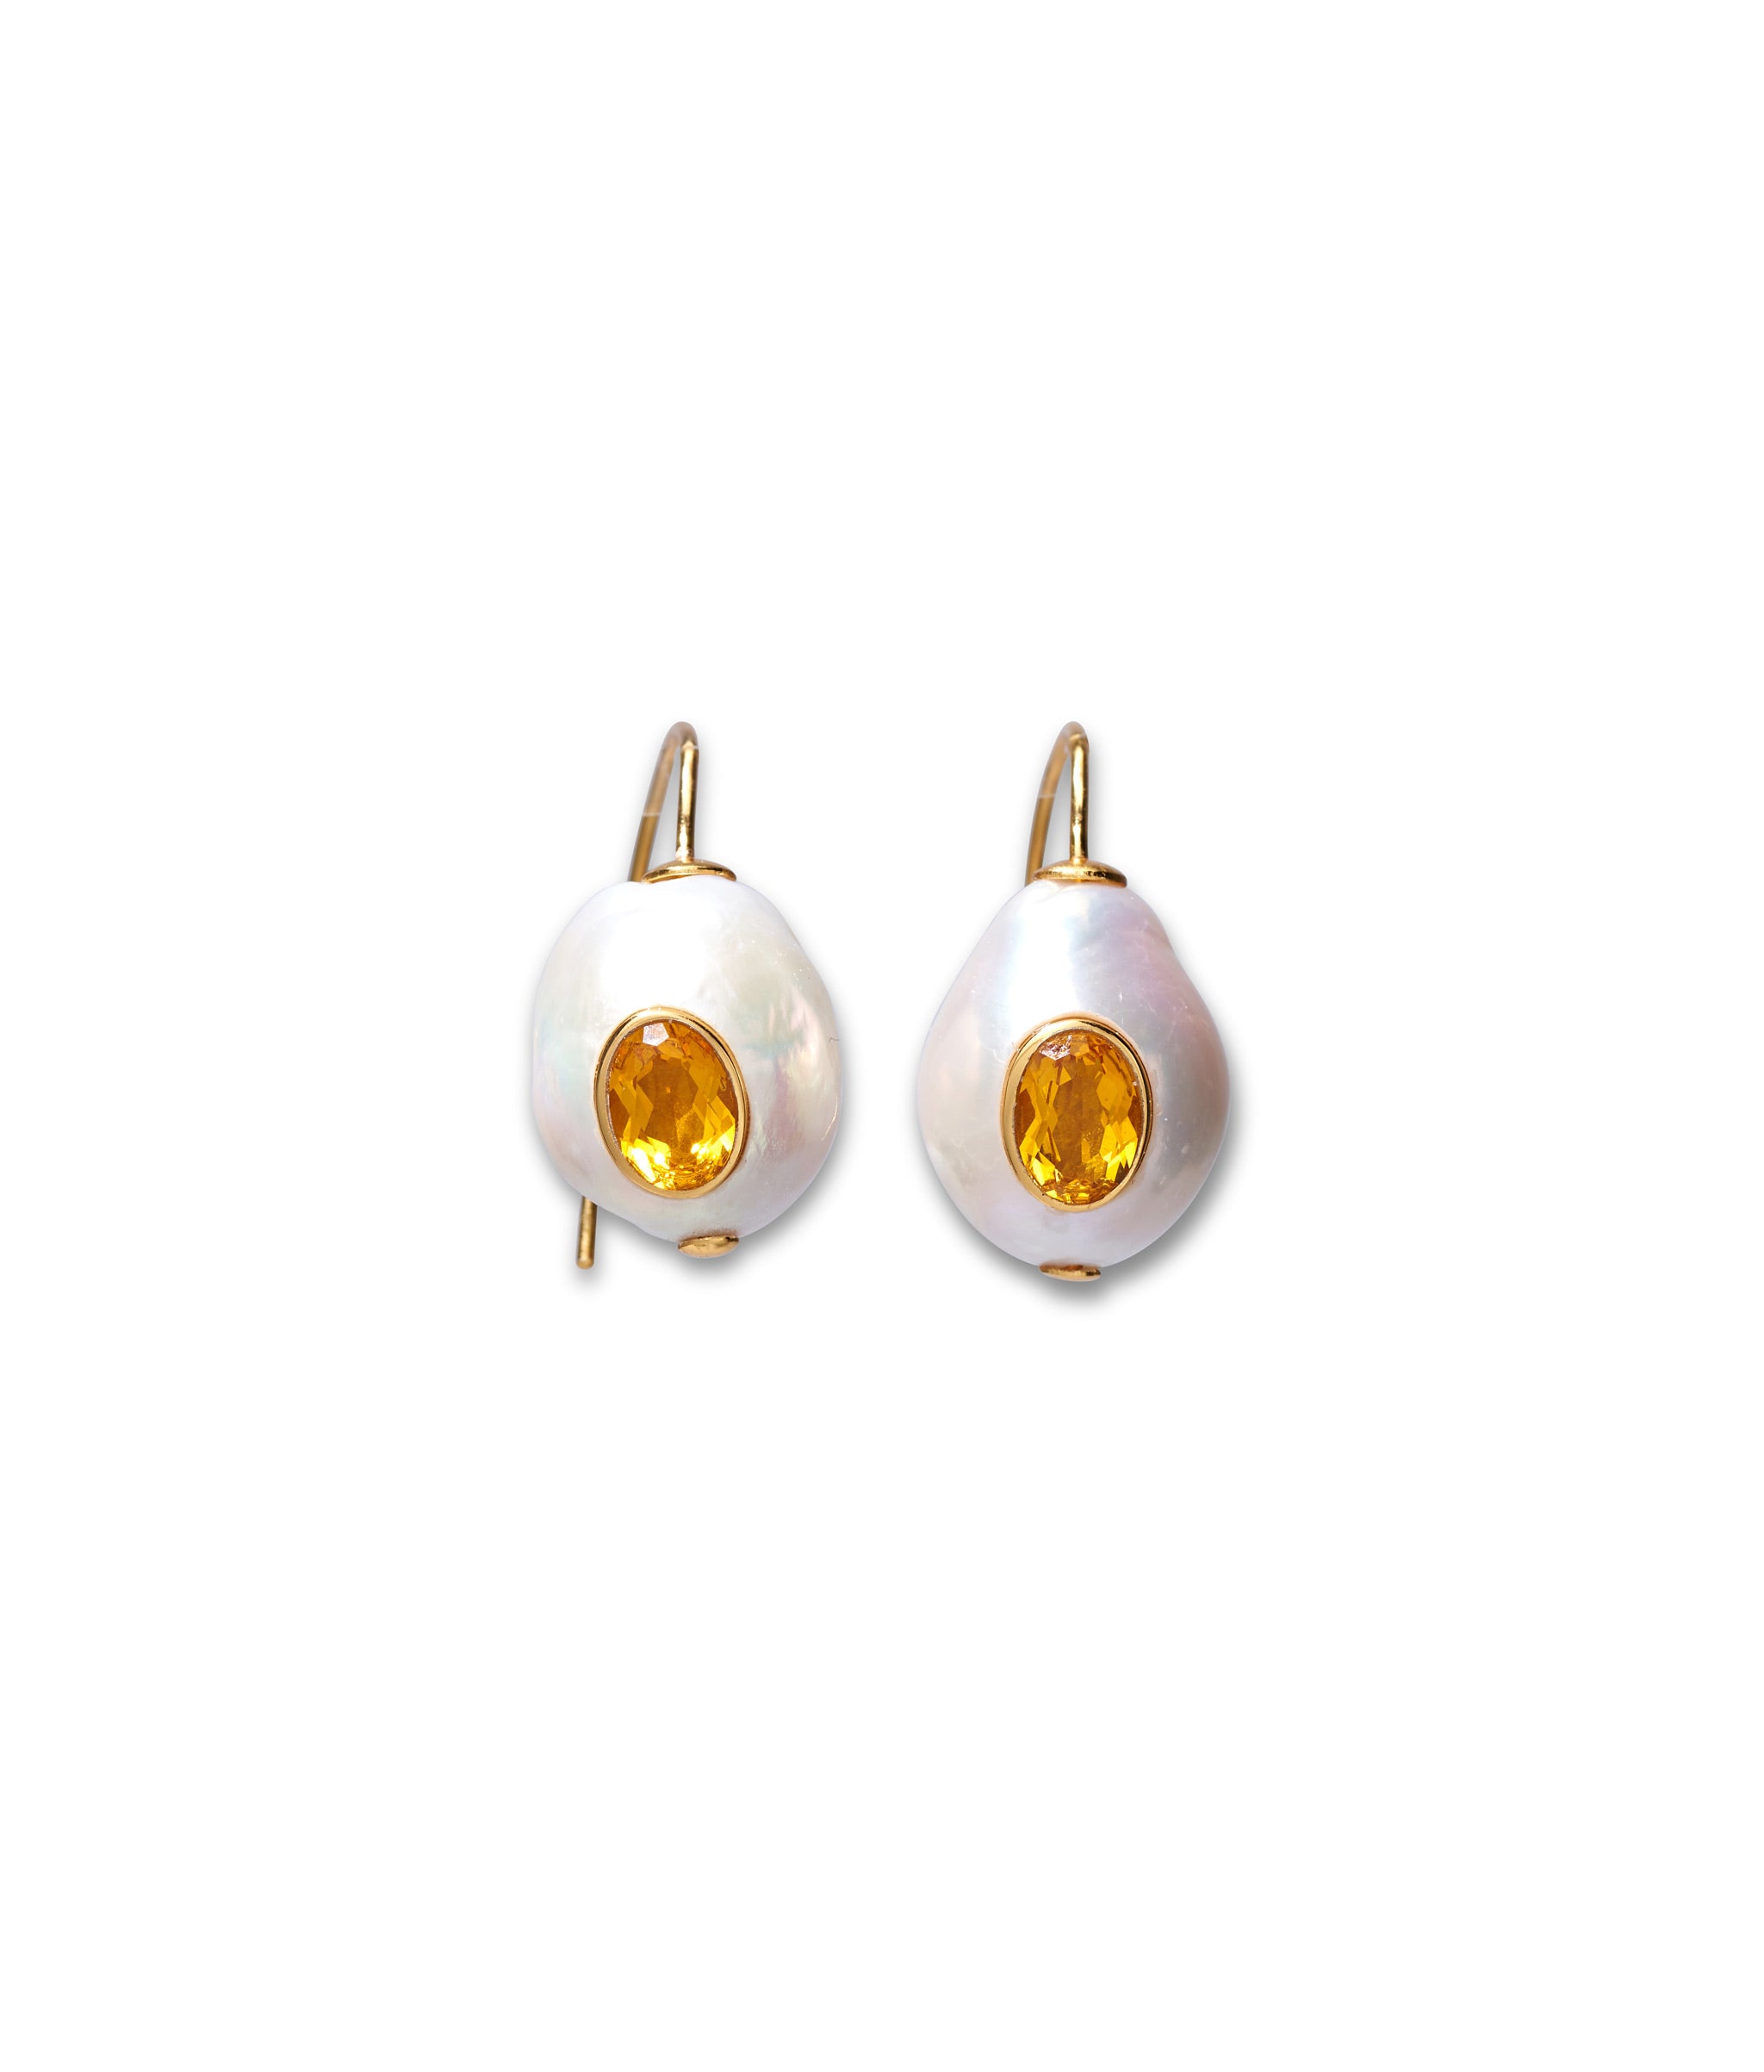 Pearl Pablo Earrings in Citrine. Gold ear wires with freshwater pearl drops inlaid with faceted citrine stones.